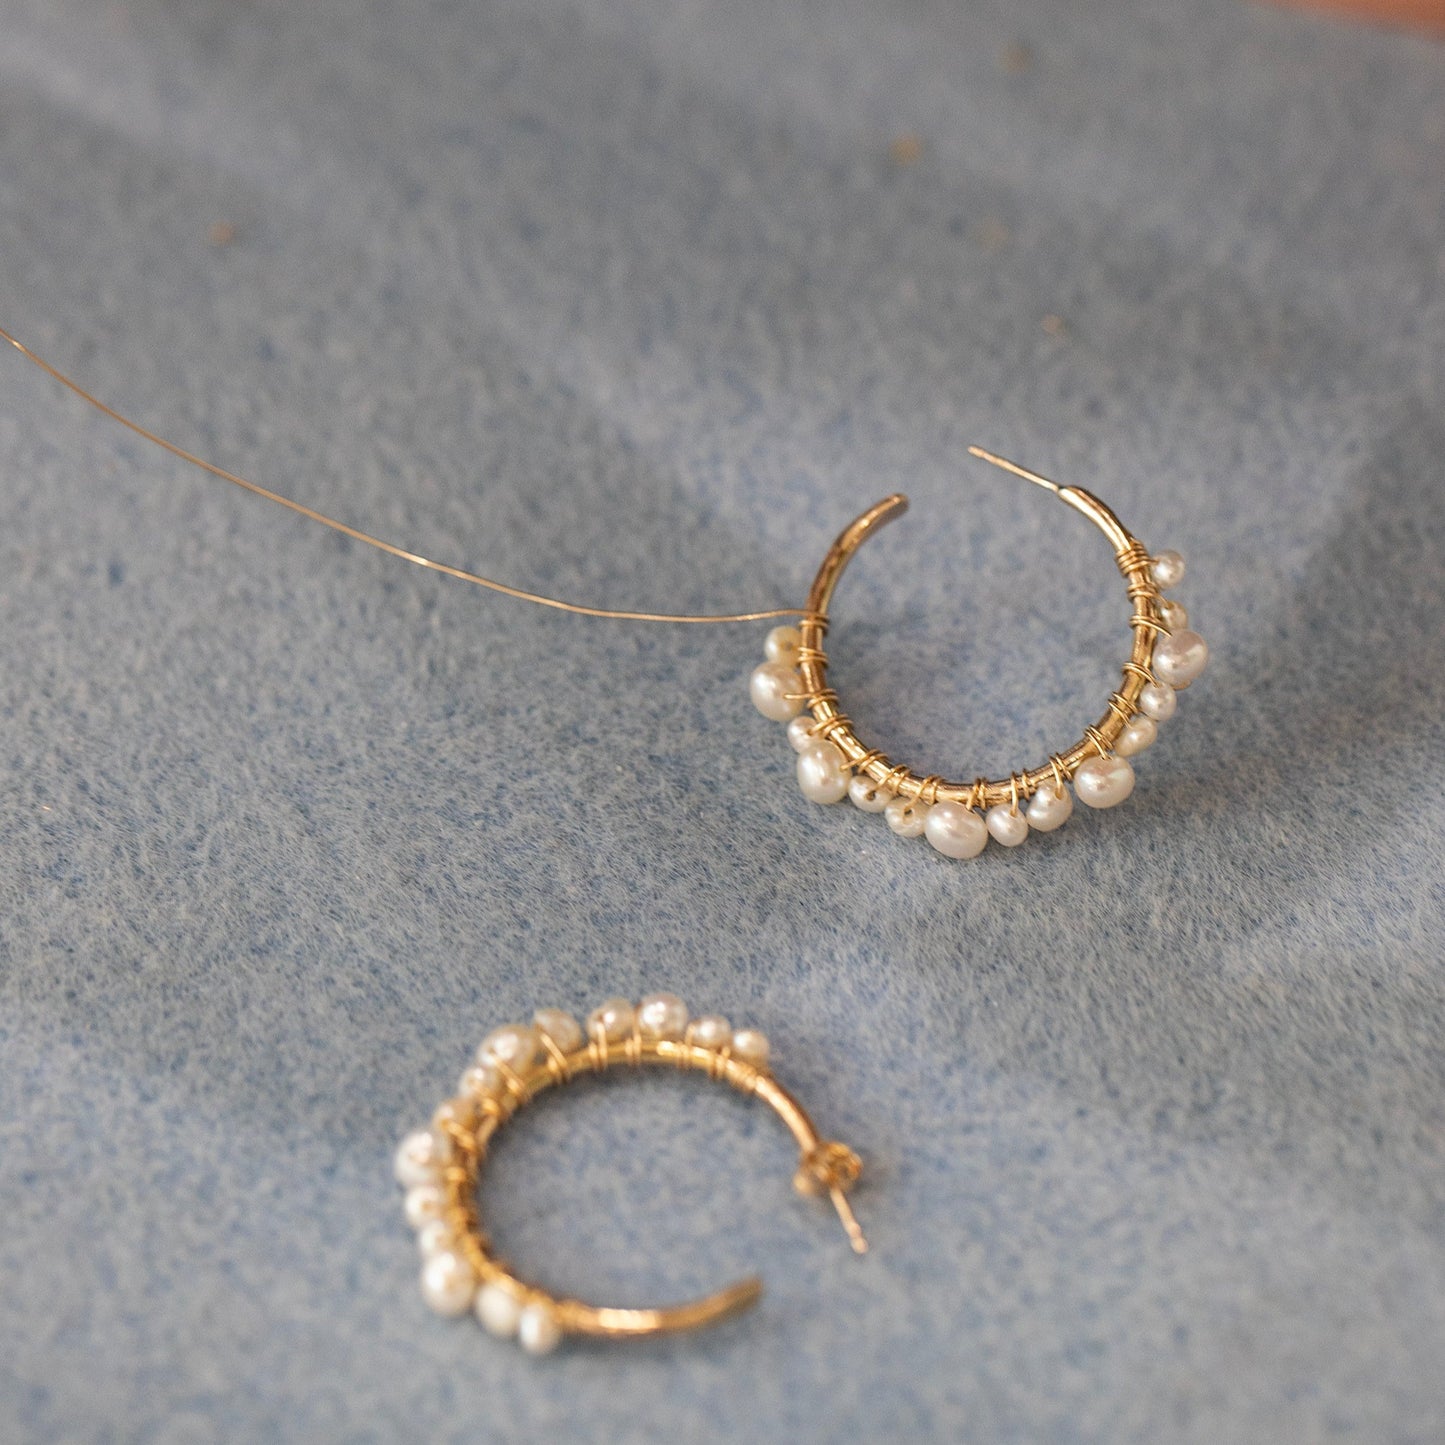 Thank you Gift for Teacher - Pearls of Wisdom Hoop Earrings - 3cm - Silver & Gold